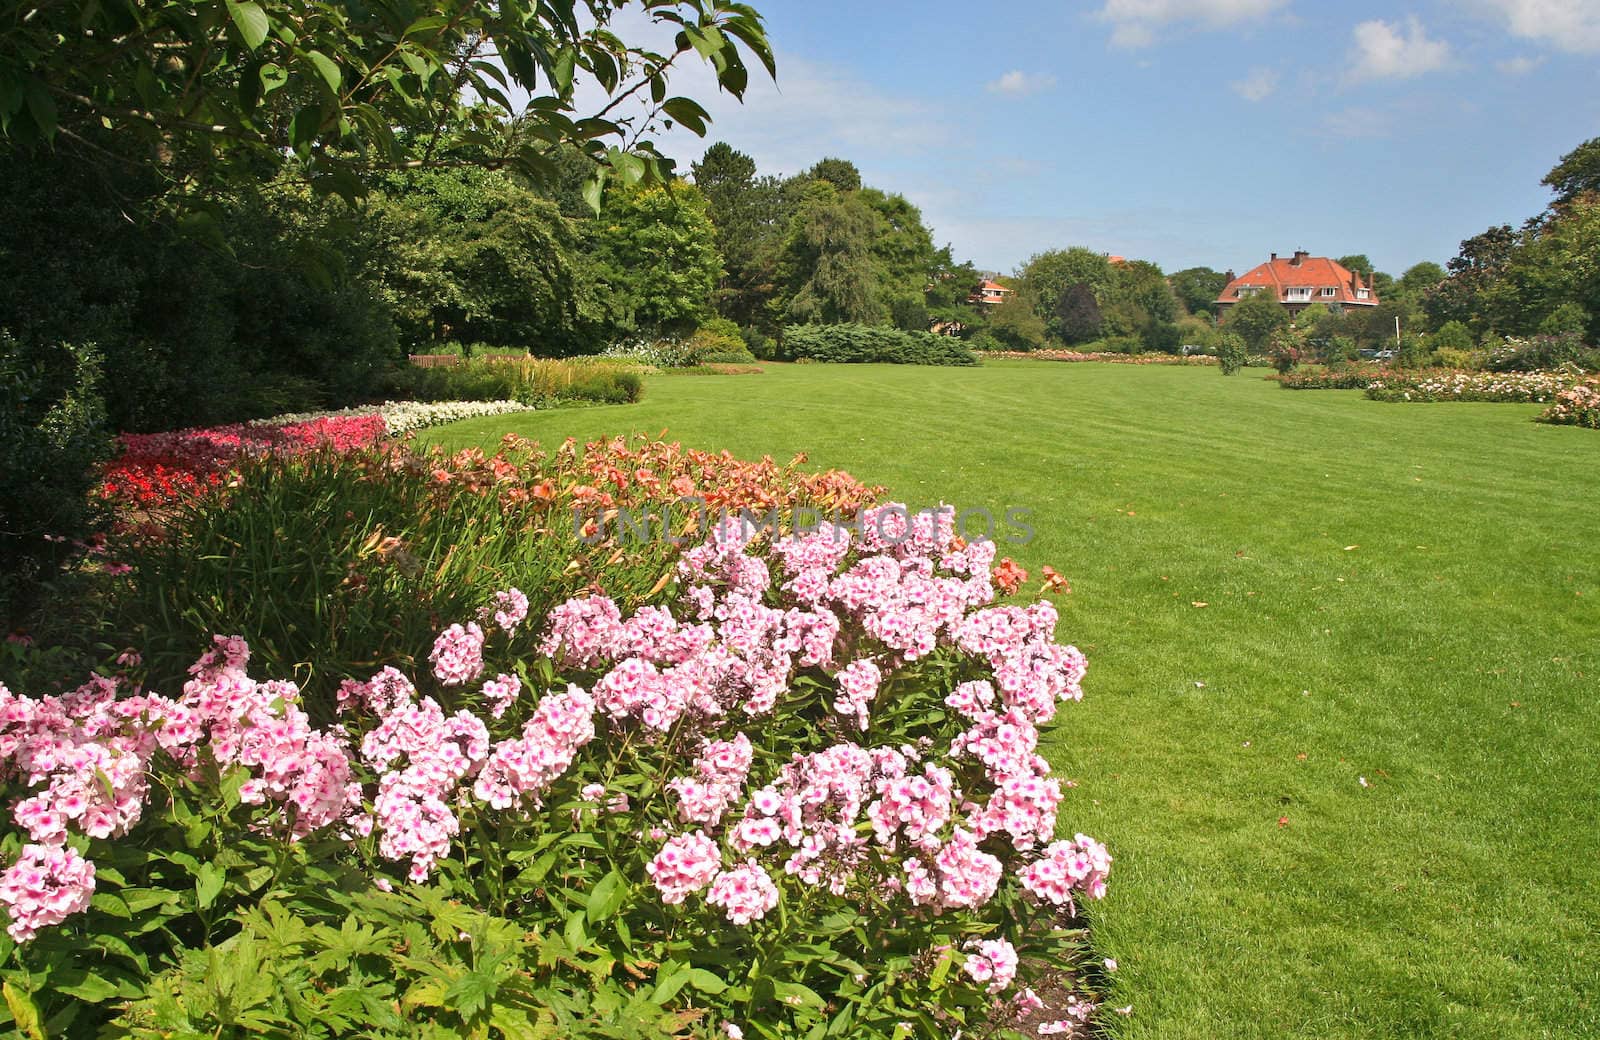 Westbroek Park with spring flowers in The Hague, Holland